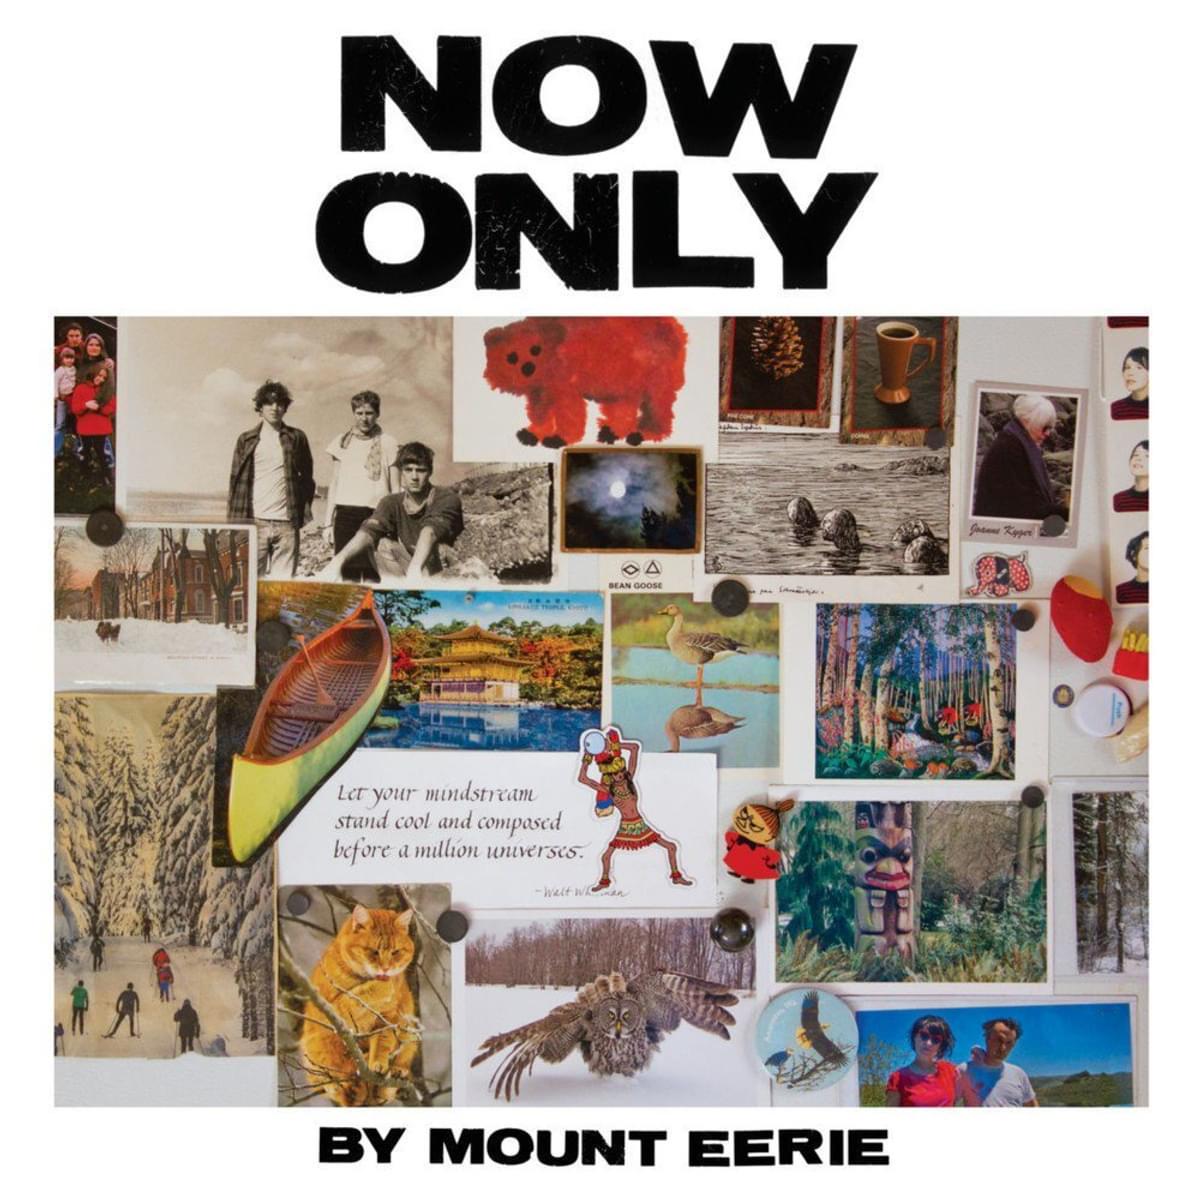 Mount eerie now only